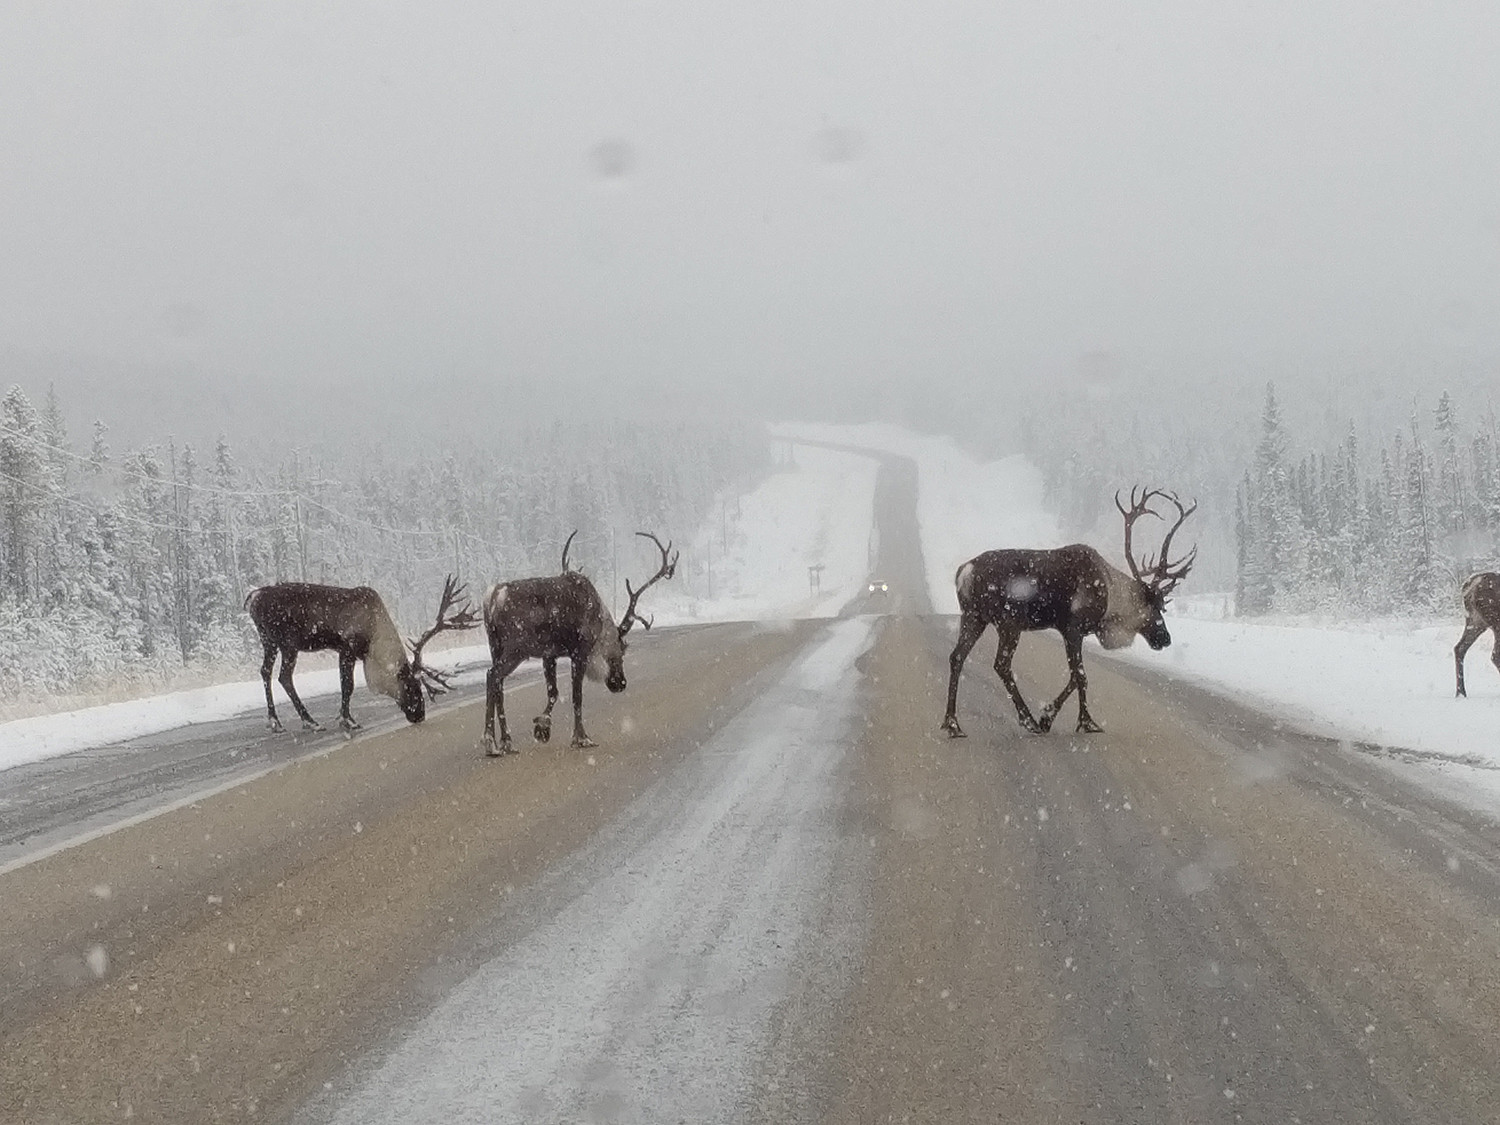 caribou crossing the highway in a snowstorm